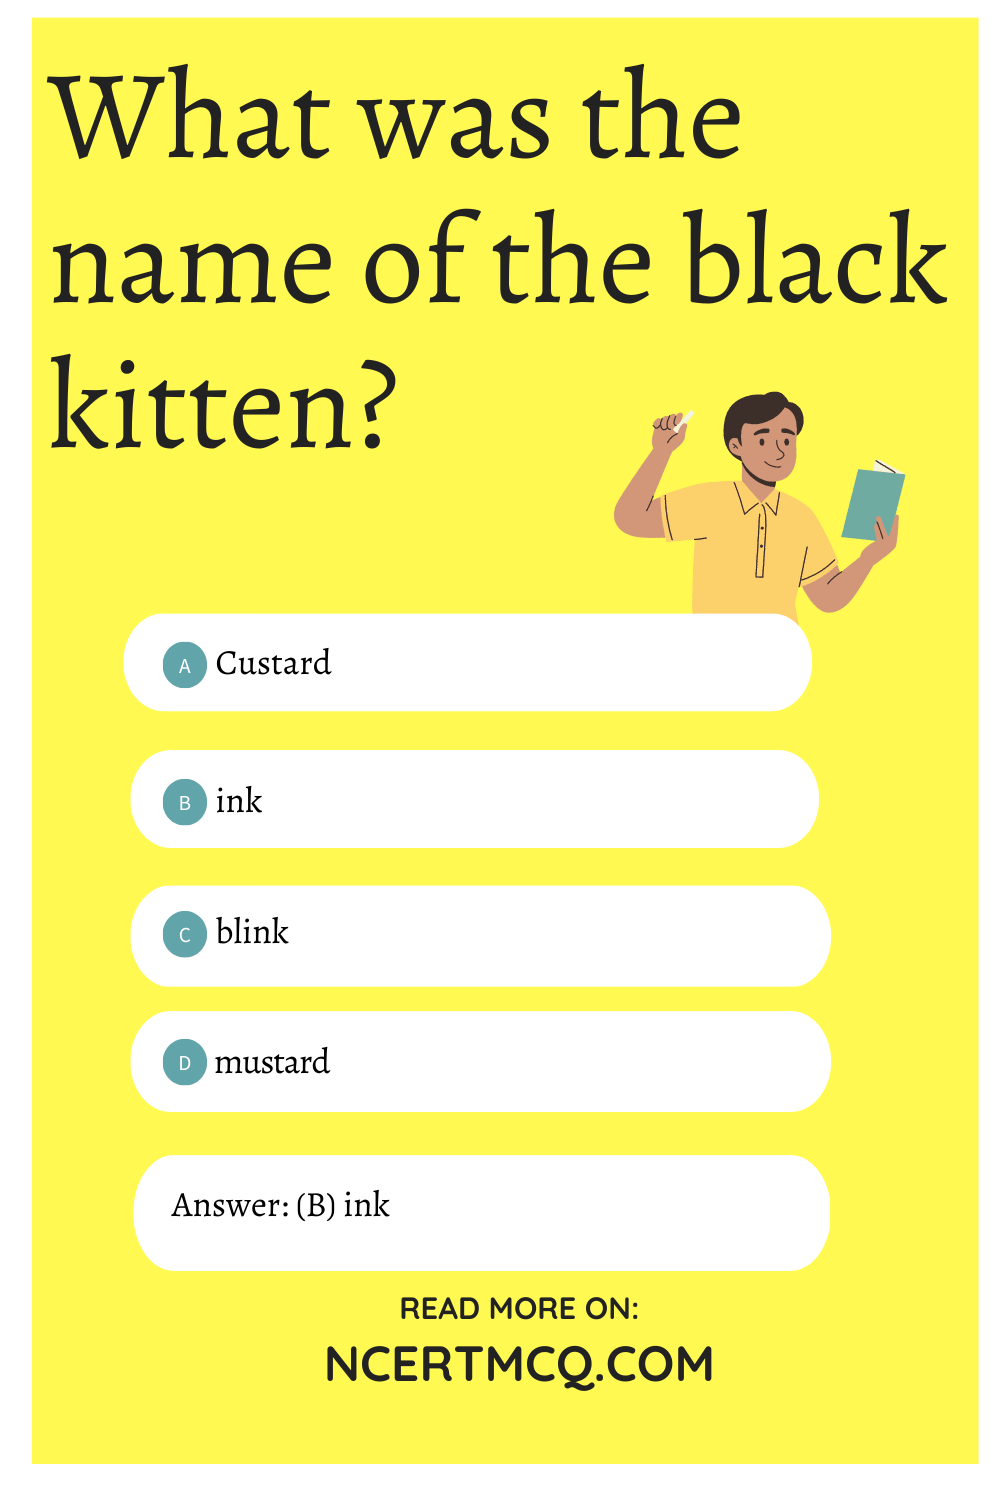 What was the name of the black kitten?